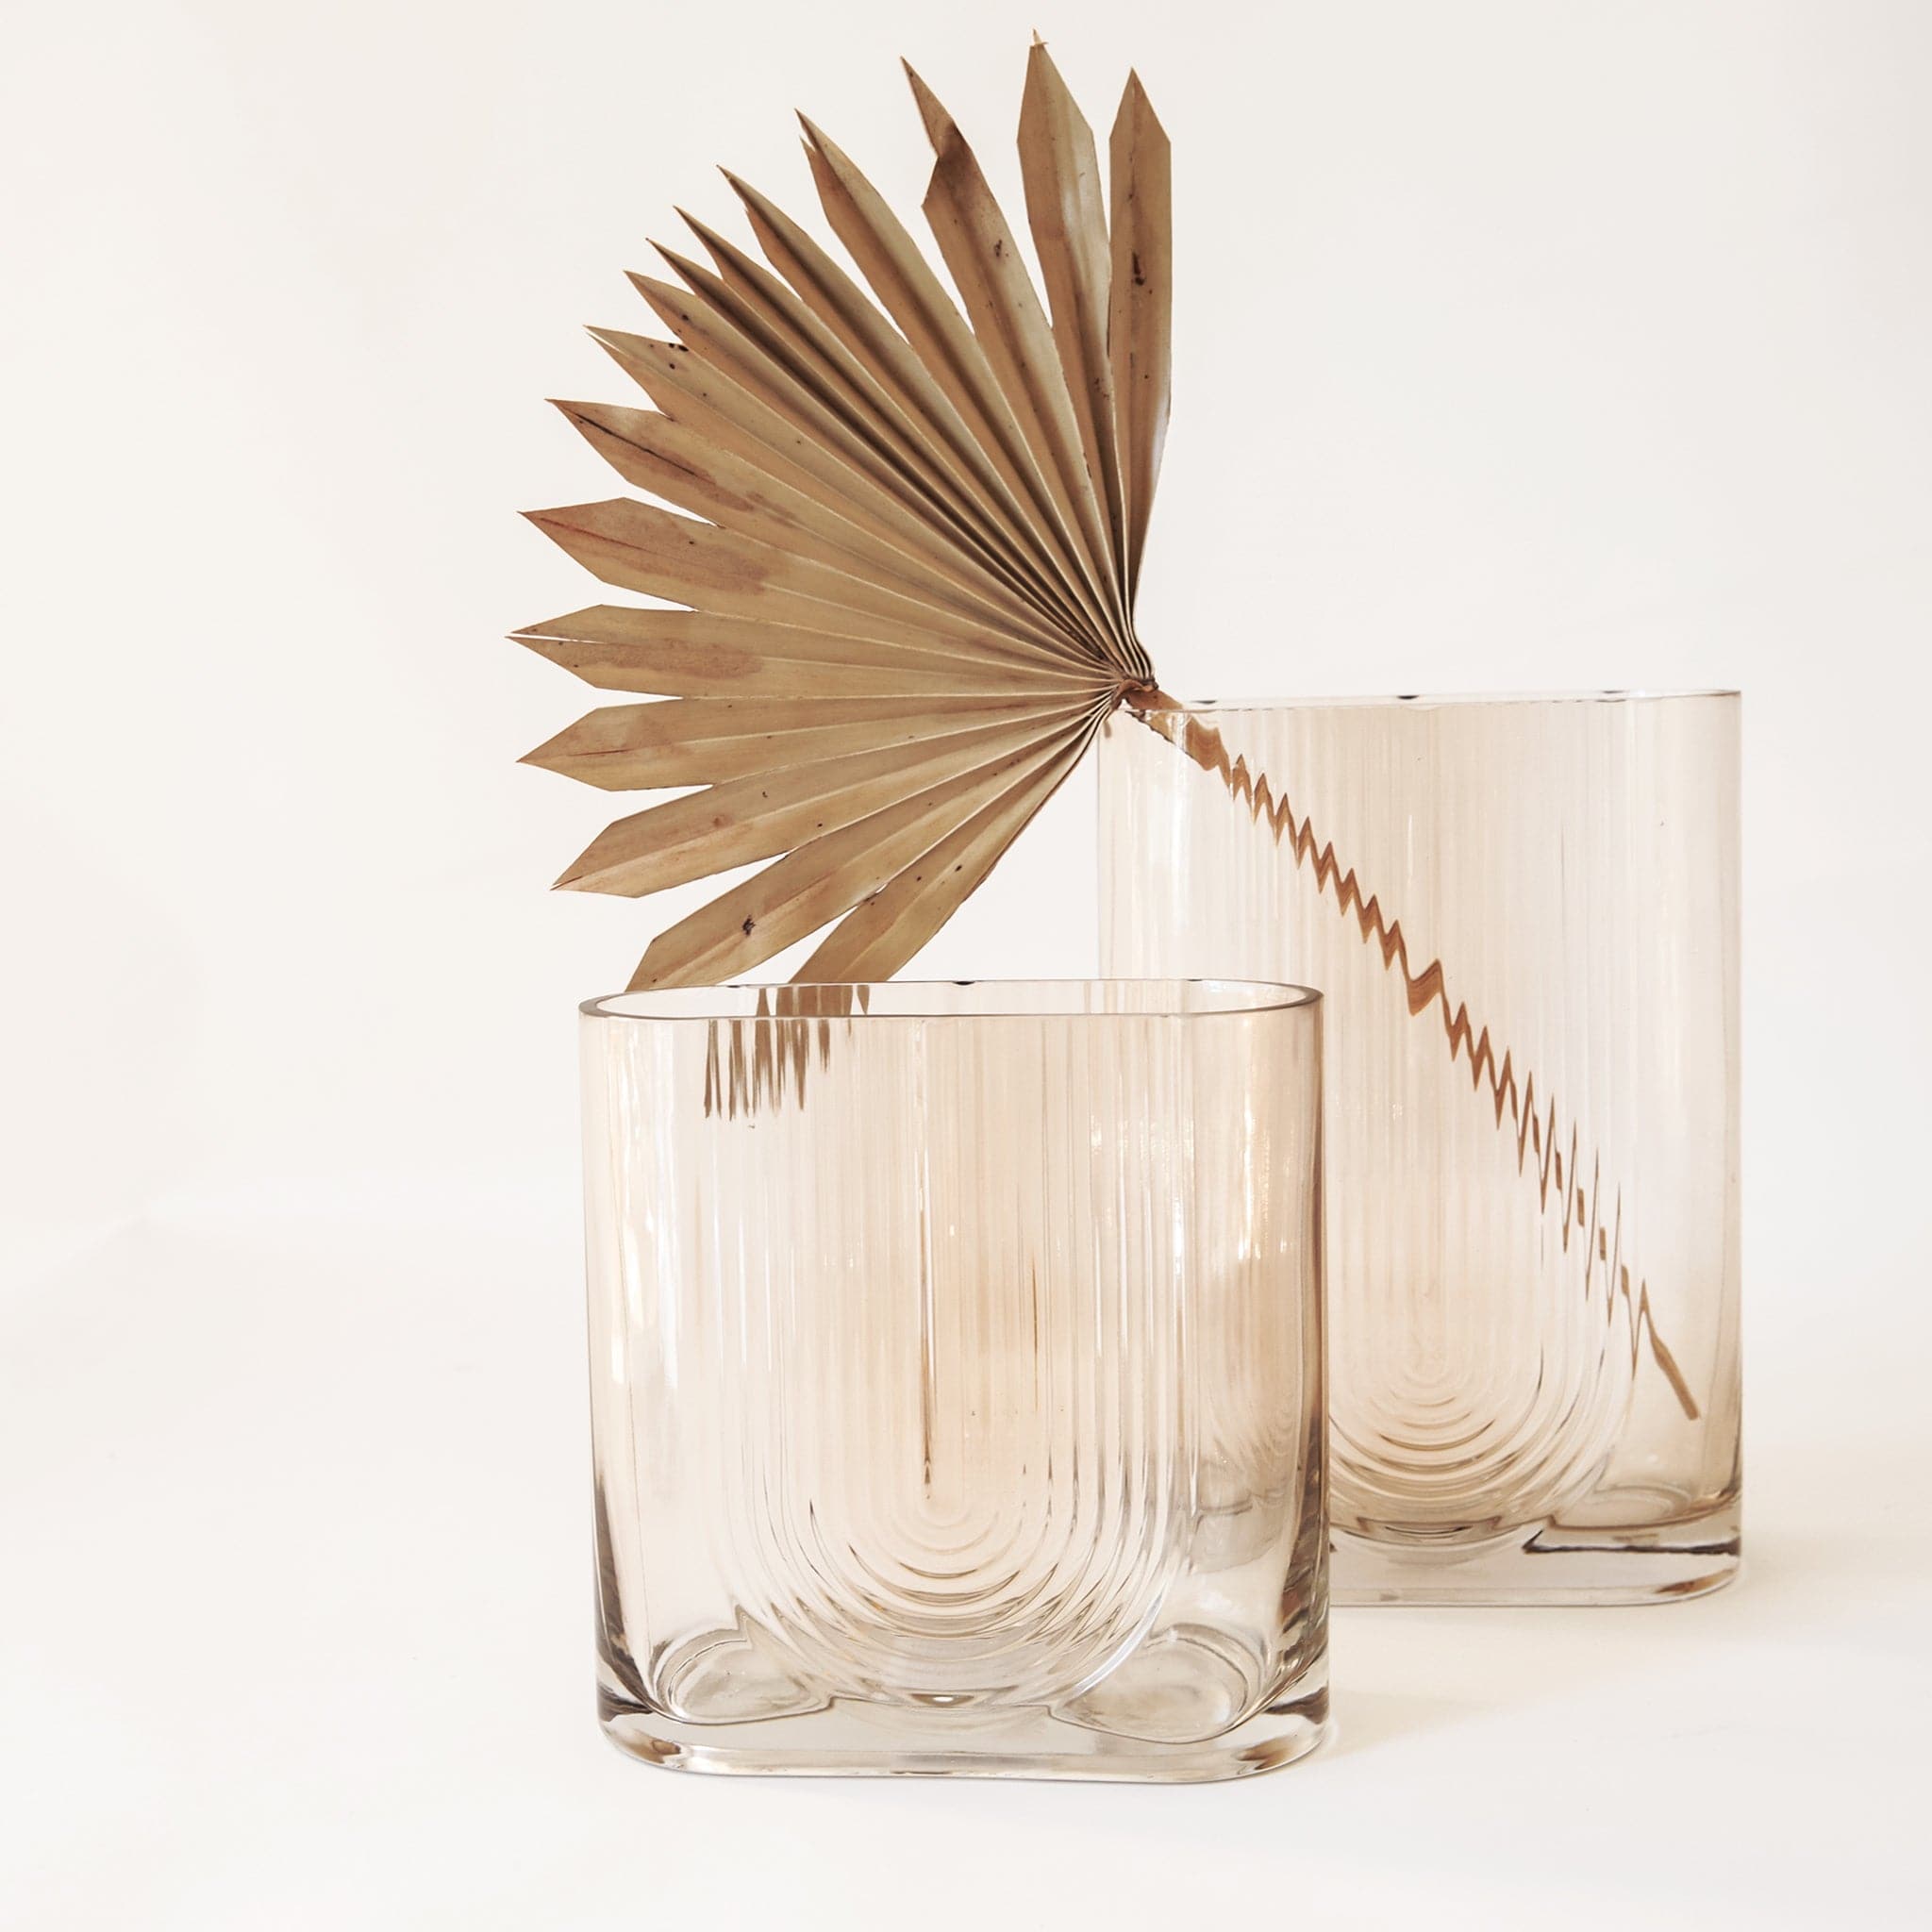 The morena vase in small and large with one dried palm fan in the large vase. The morena vase has a unique shape. It is made from glass and has an oblong opening. The body of the vase is tall and angular resembling a square or rectangle, but with a pill-shaped opening the same width as the vase. There is a design on the front resembling a boho, upside-down rainbow design.